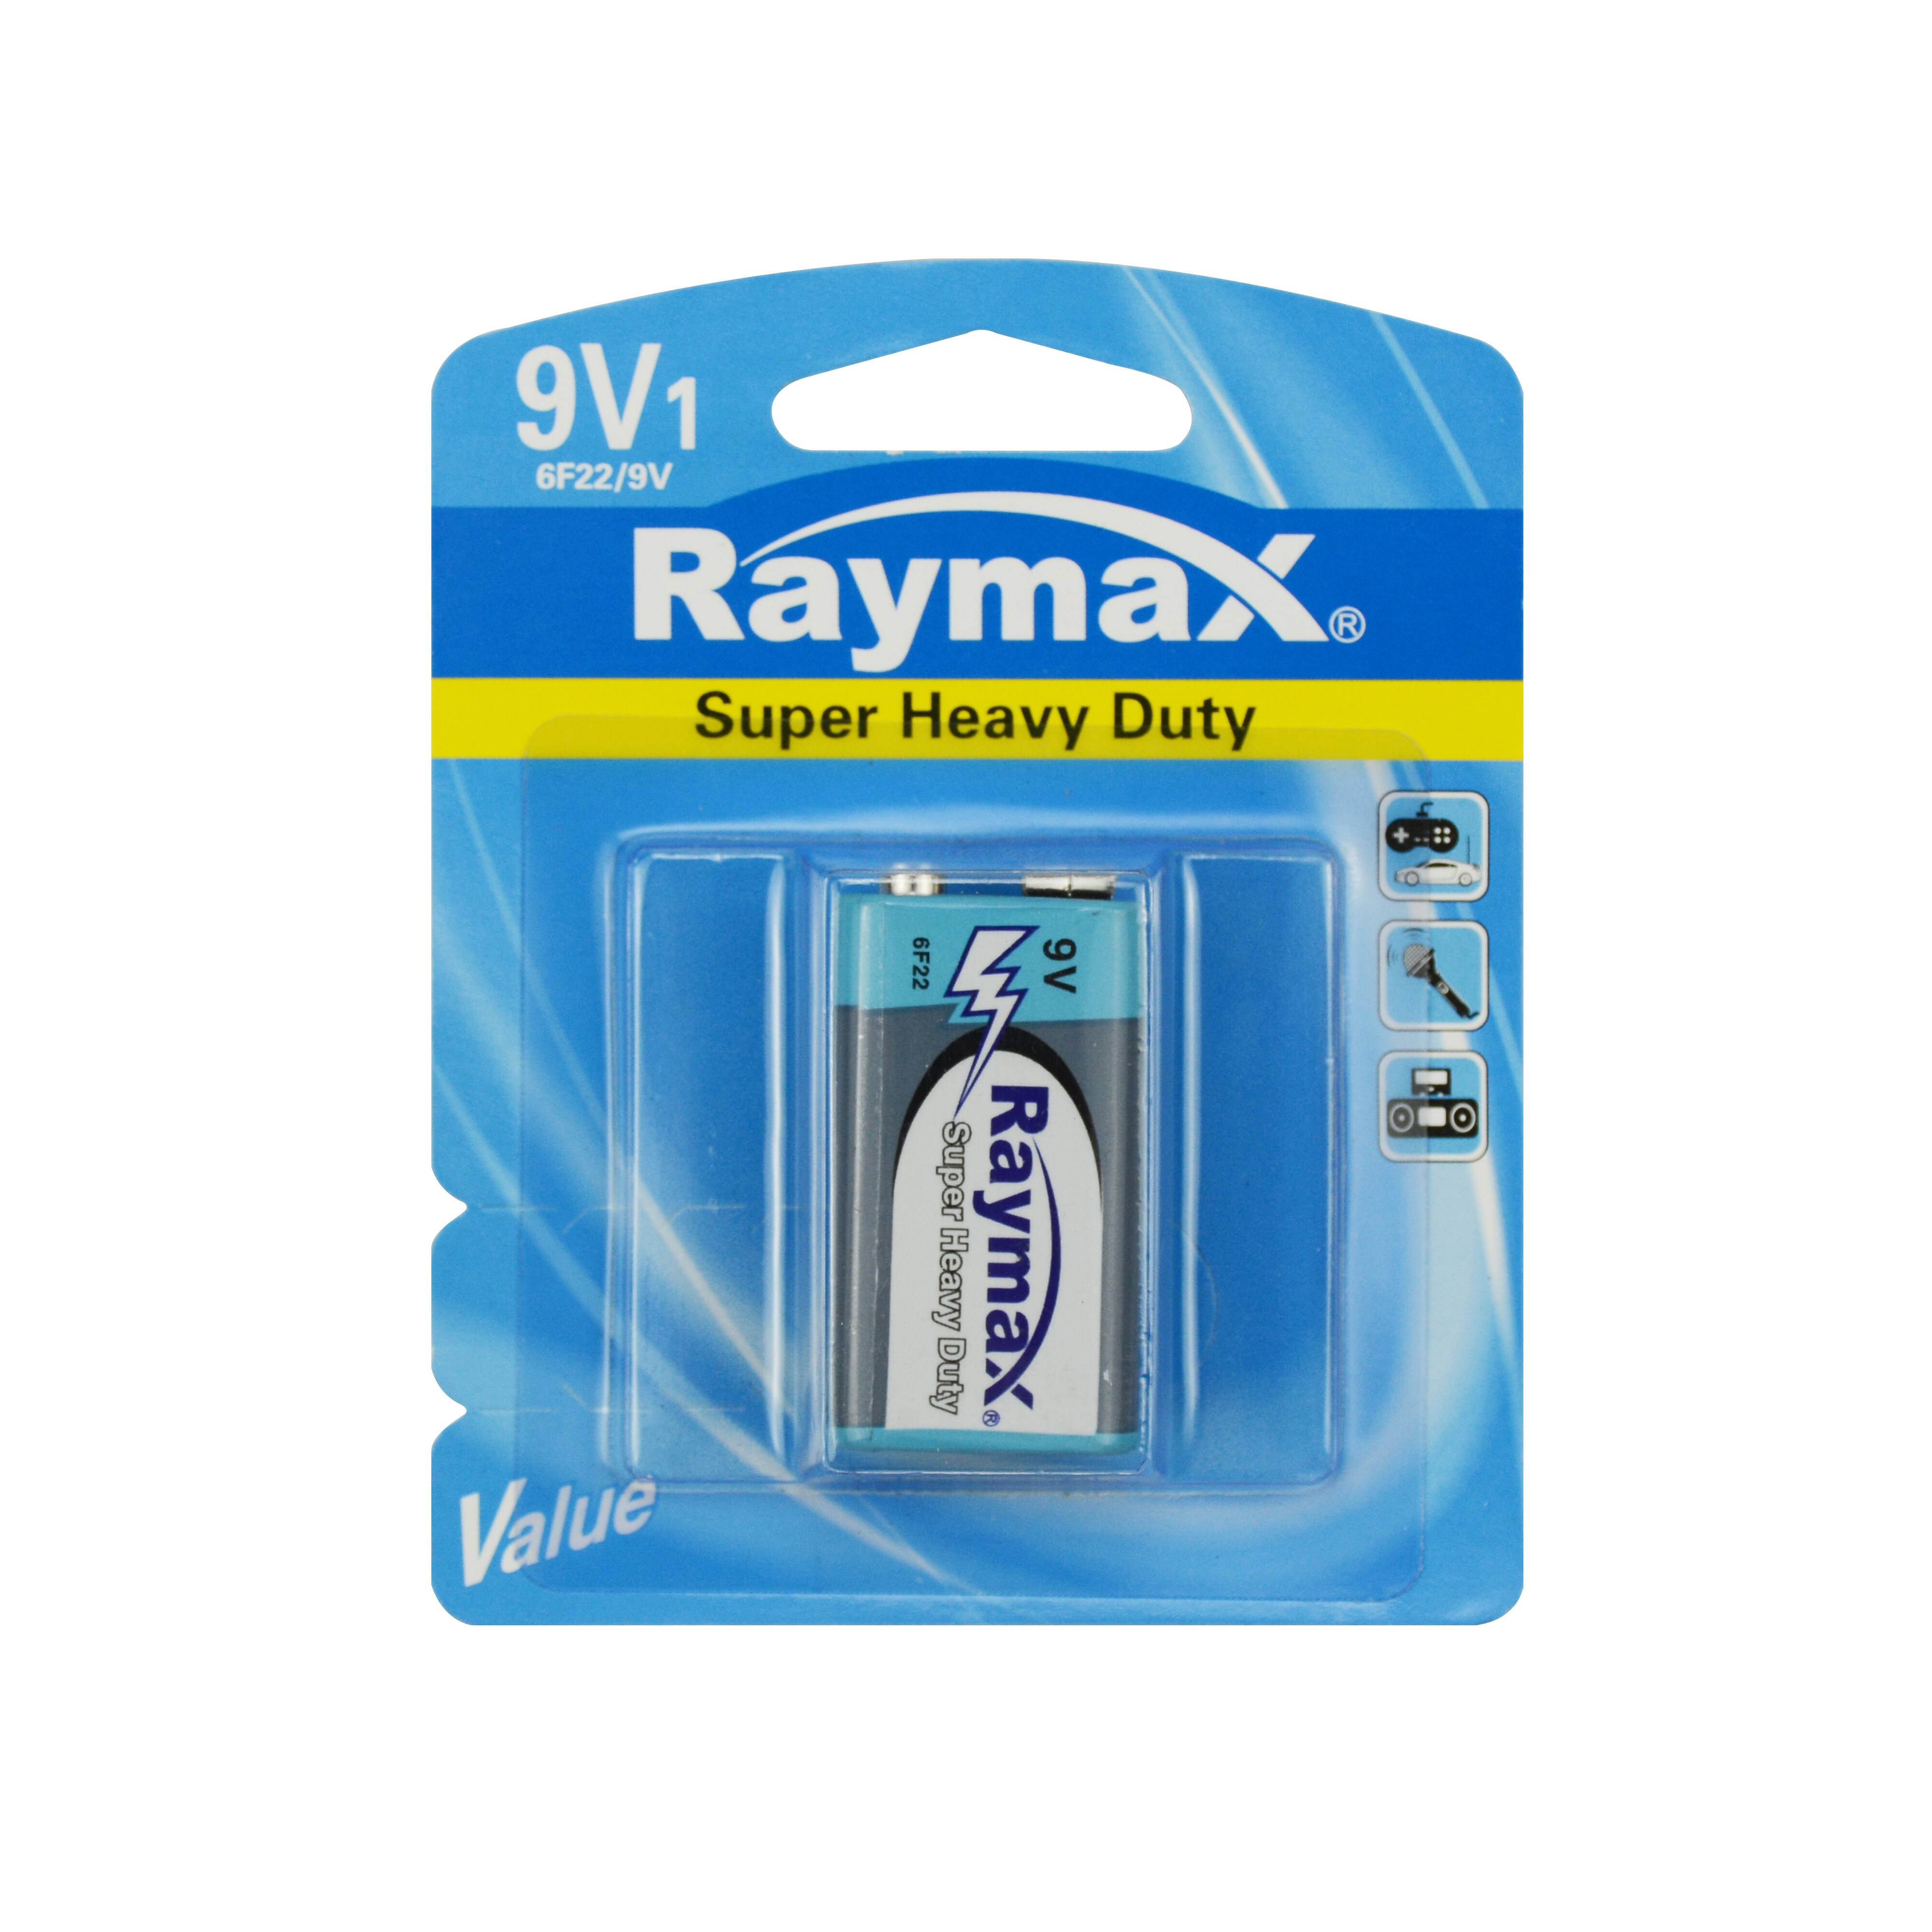 Raymax customized 6F22 9V wholesale super heavy duty battery, pack of 1 – great for smoke detectors